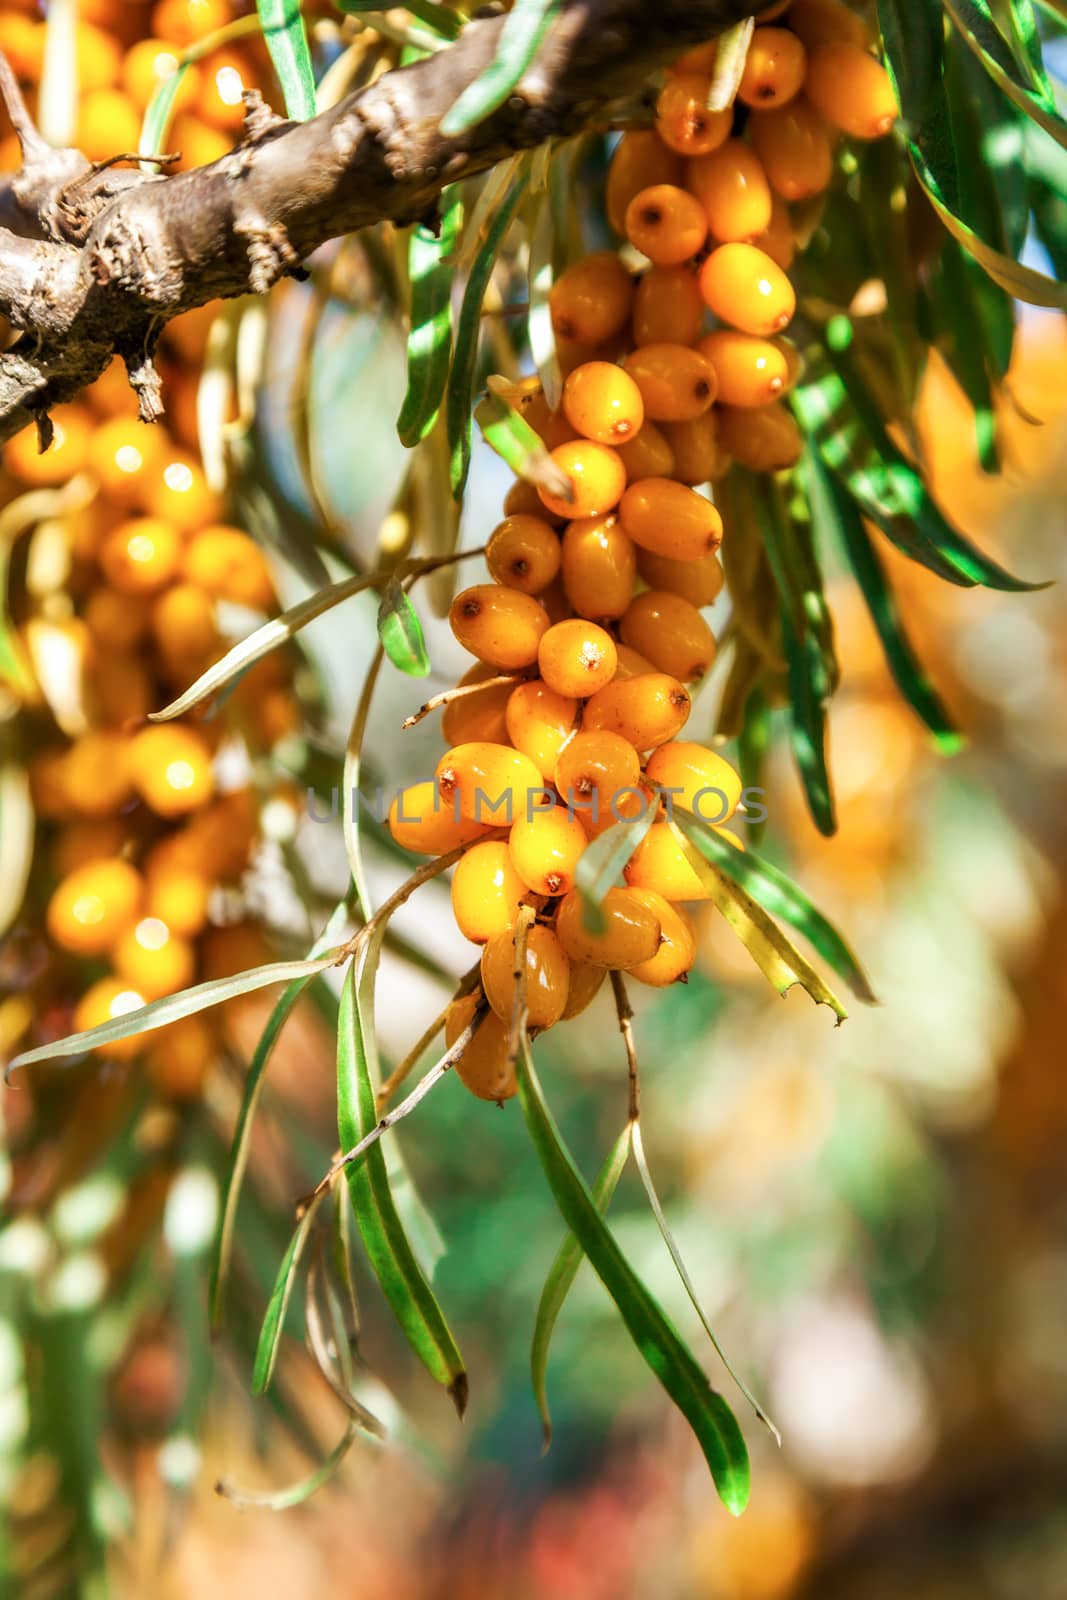 Orange berries of a sea-buckthorn on a branch with leaves